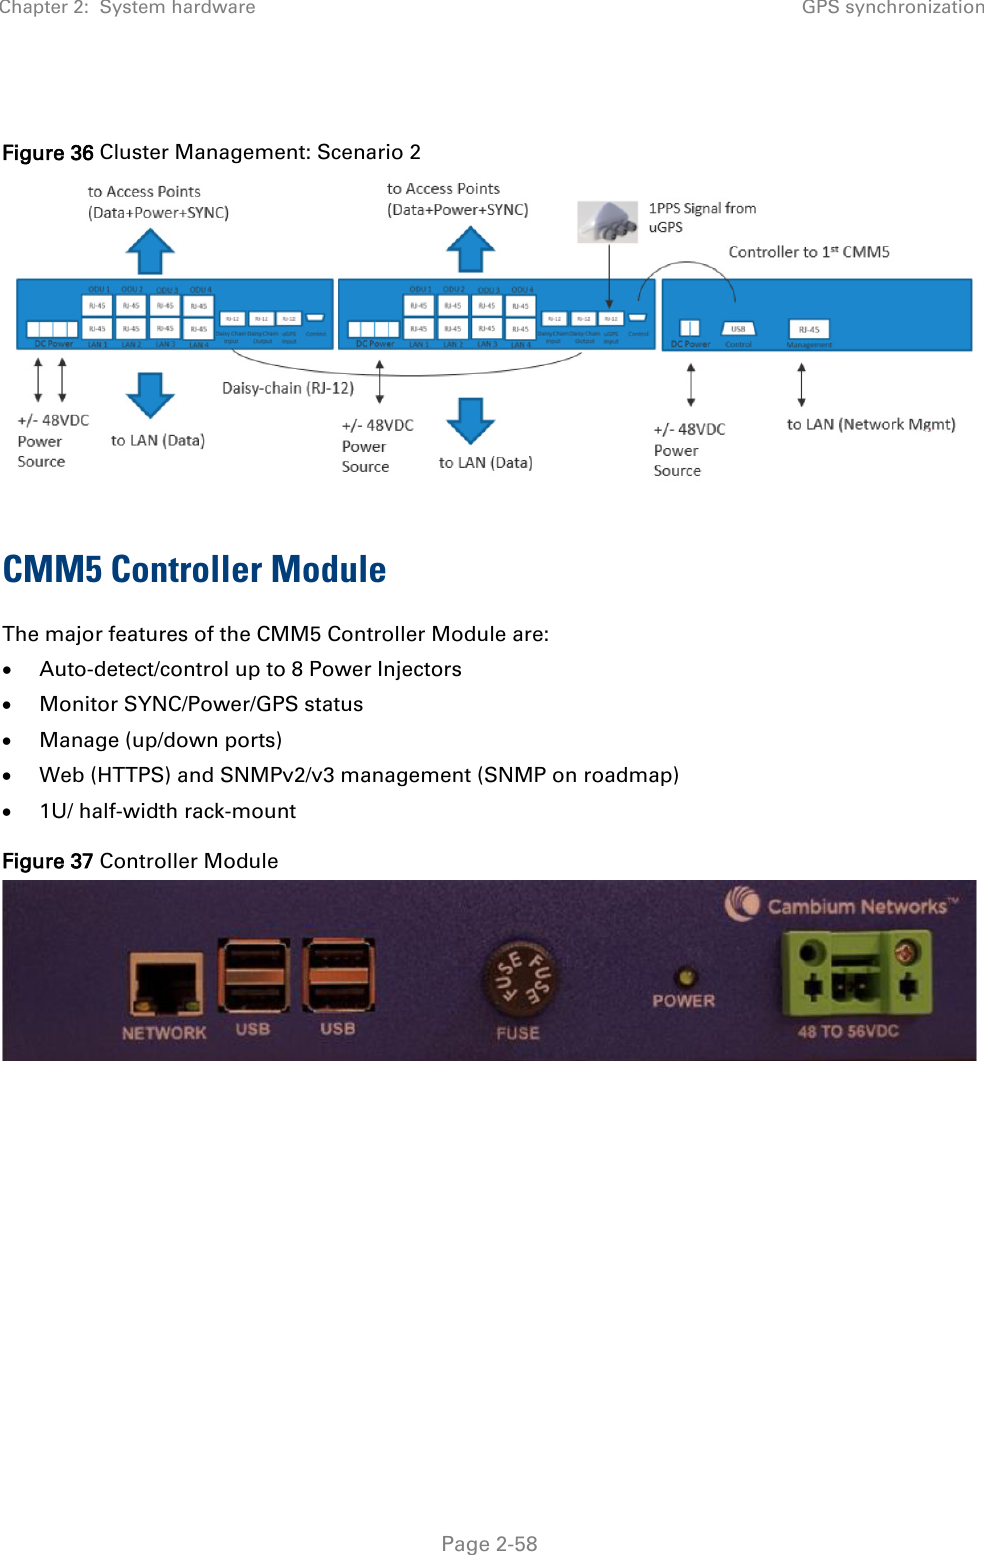 Chapter 2:  System hardware GPS synchronization   Page 2-58  Figure 36 Cluster Management: Scenario 2  CMM5 Controller Module The major features of the CMM5 Controller Module are: • Auto-detect/control up to 8 Power Injectors • Monitor SYNC/Power/GPS status • Manage (up/down ports) • Web (HTTPS) and SNMPv2/v3 management (SNMP on roadmap) • 1U/ half-width rack-mount Figure 37 Controller Module    